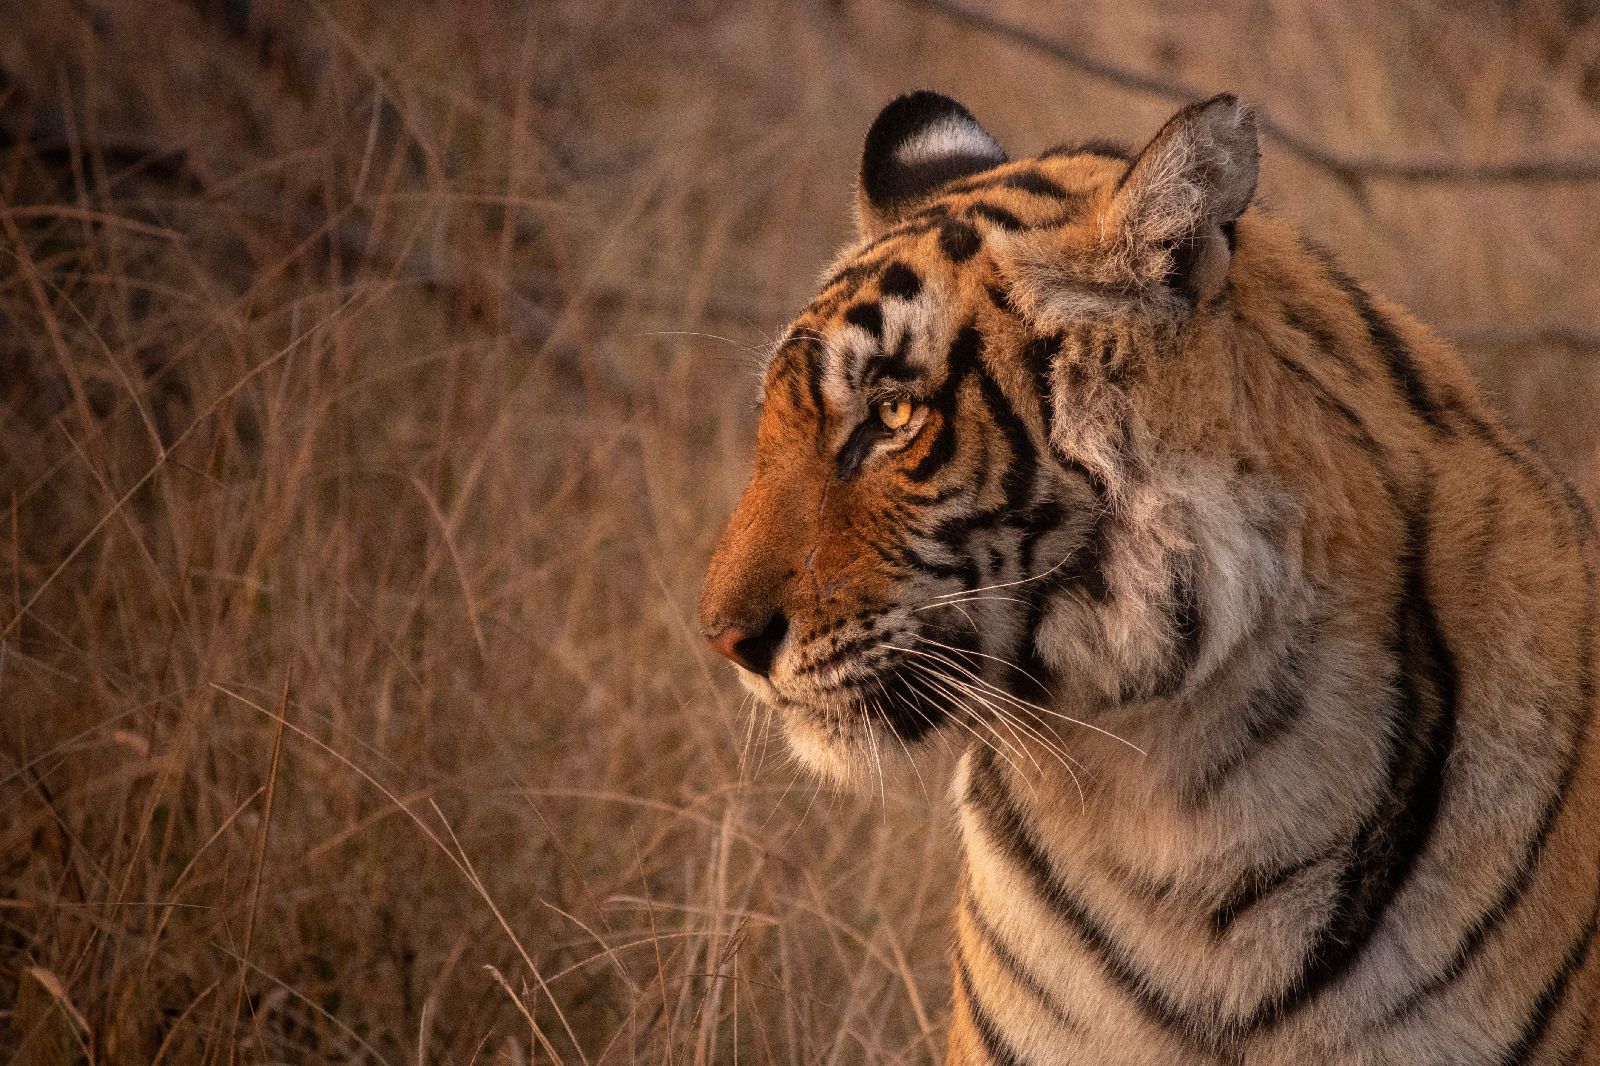 Profile of a Bengal tiger in the Ranthambore national park India